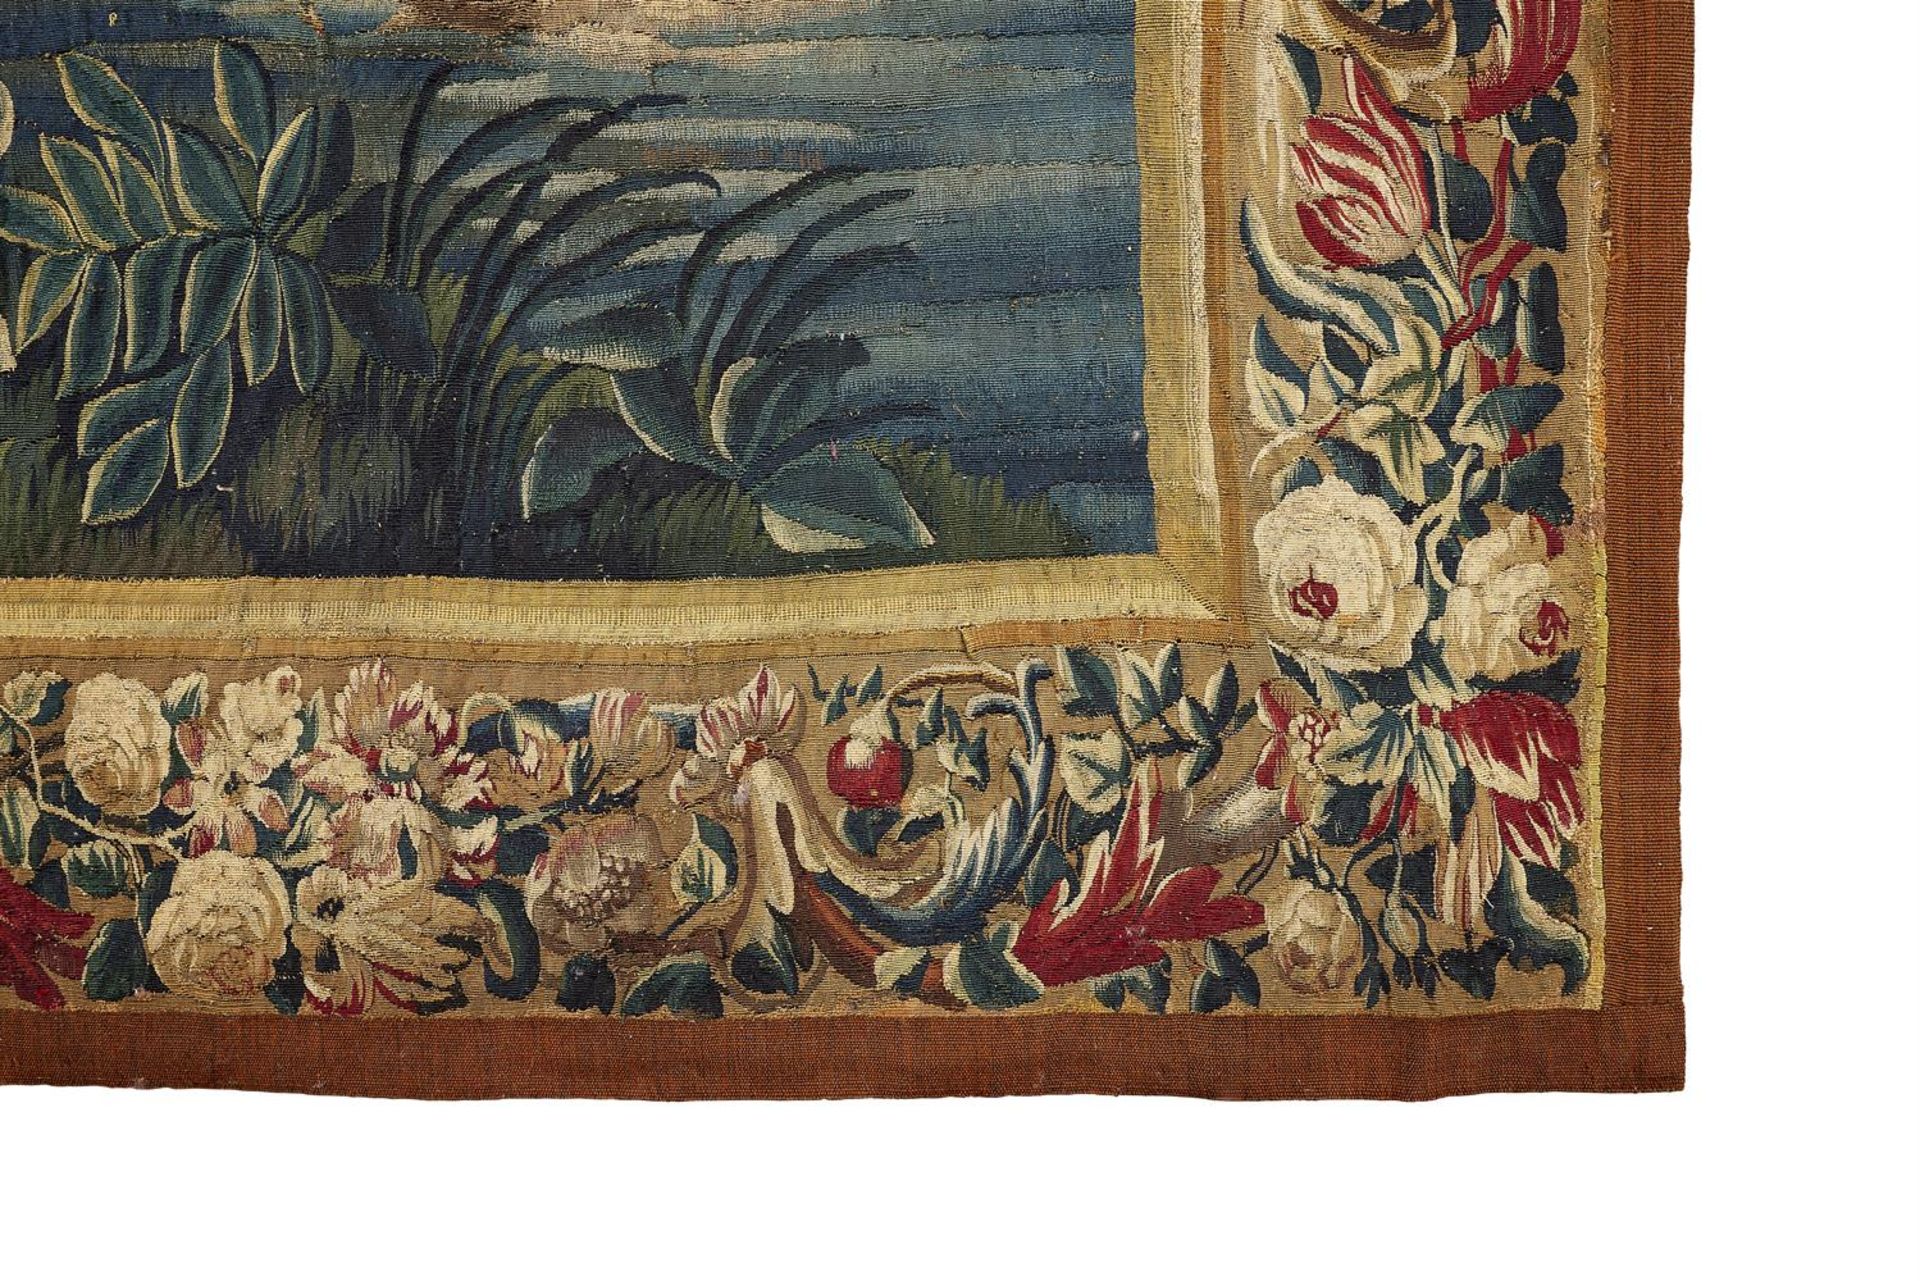 A FLEMISH MYTHOLOGICAL TAPESTRY OF DIANA THE HUNTRESS, LATE 17TH CENTURY/EARLY 18TH CENTURY - Image 3 of 3